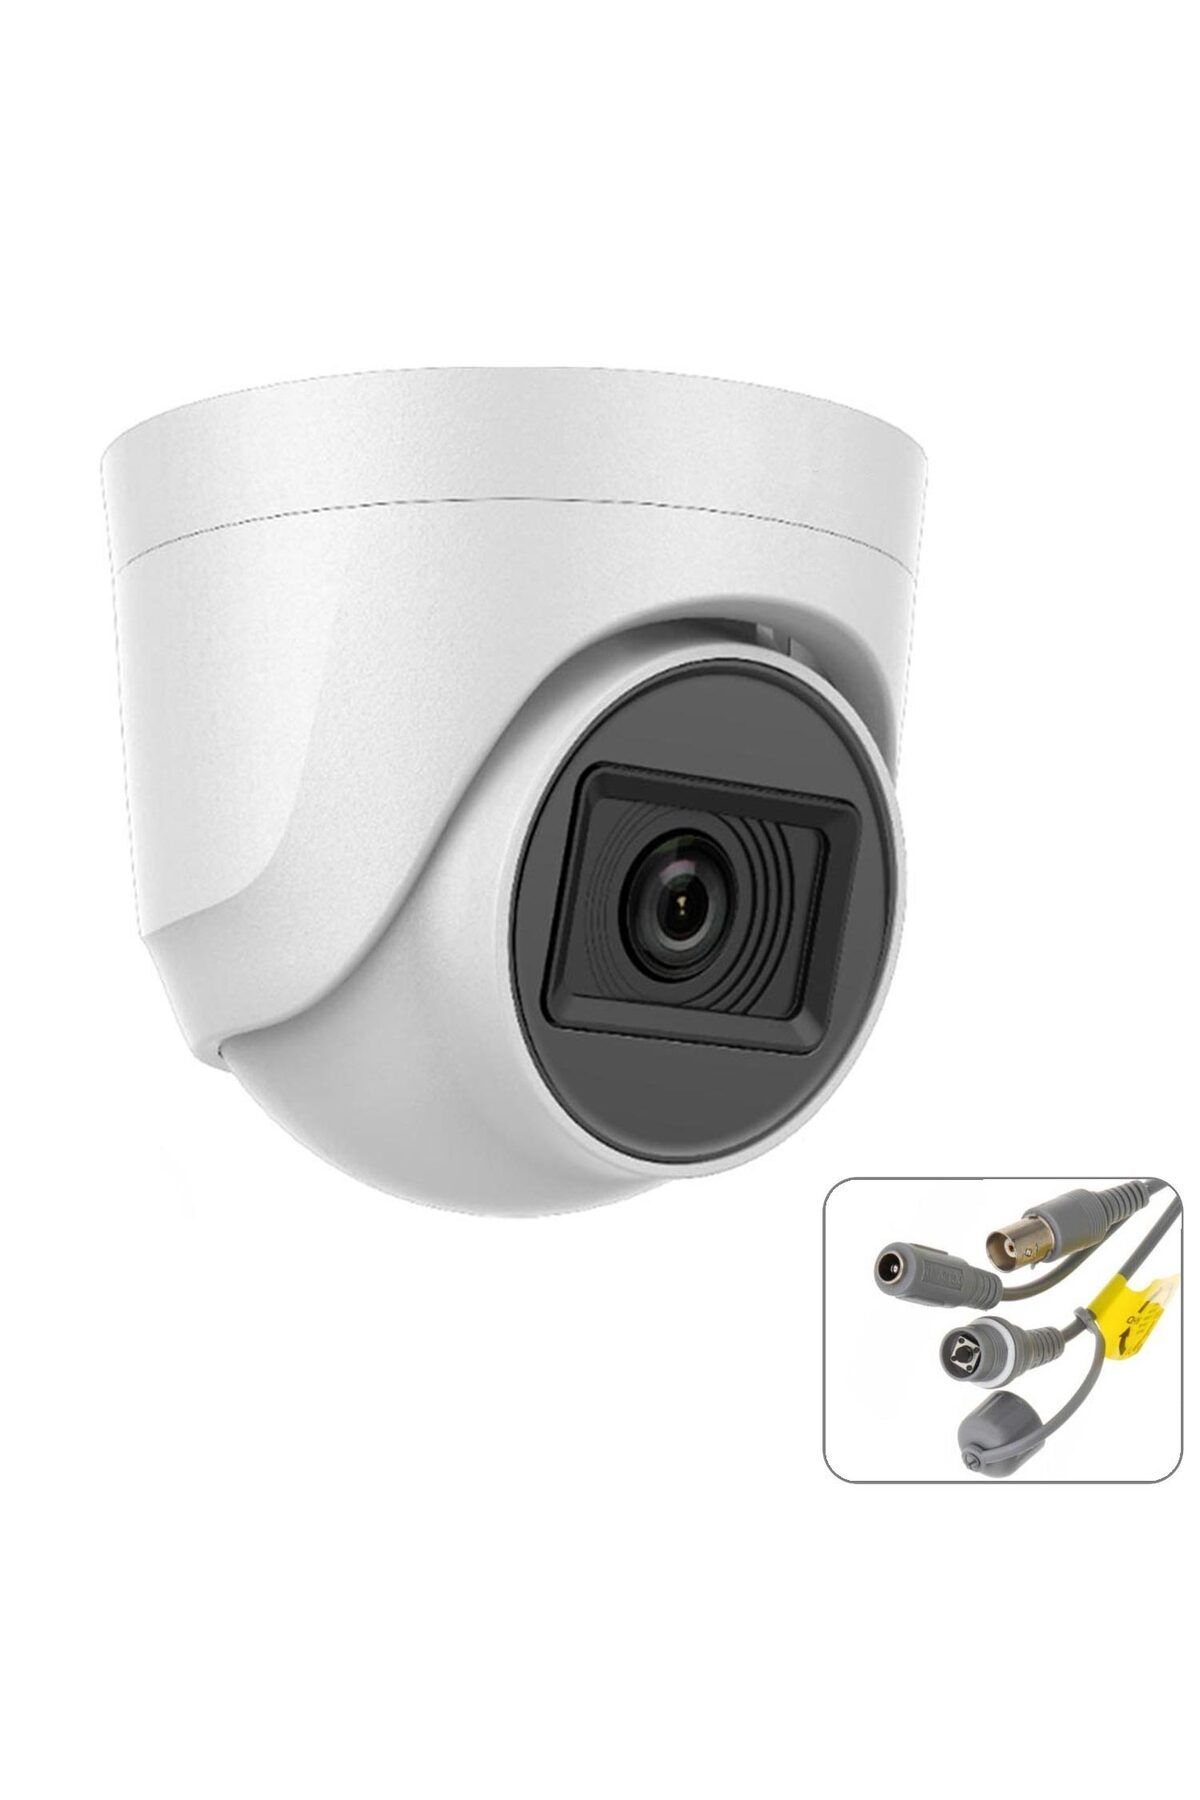 Hikvision DS-2CE76D0T-EXIPF Dome Ahd Kamera 2mp 2.8mm